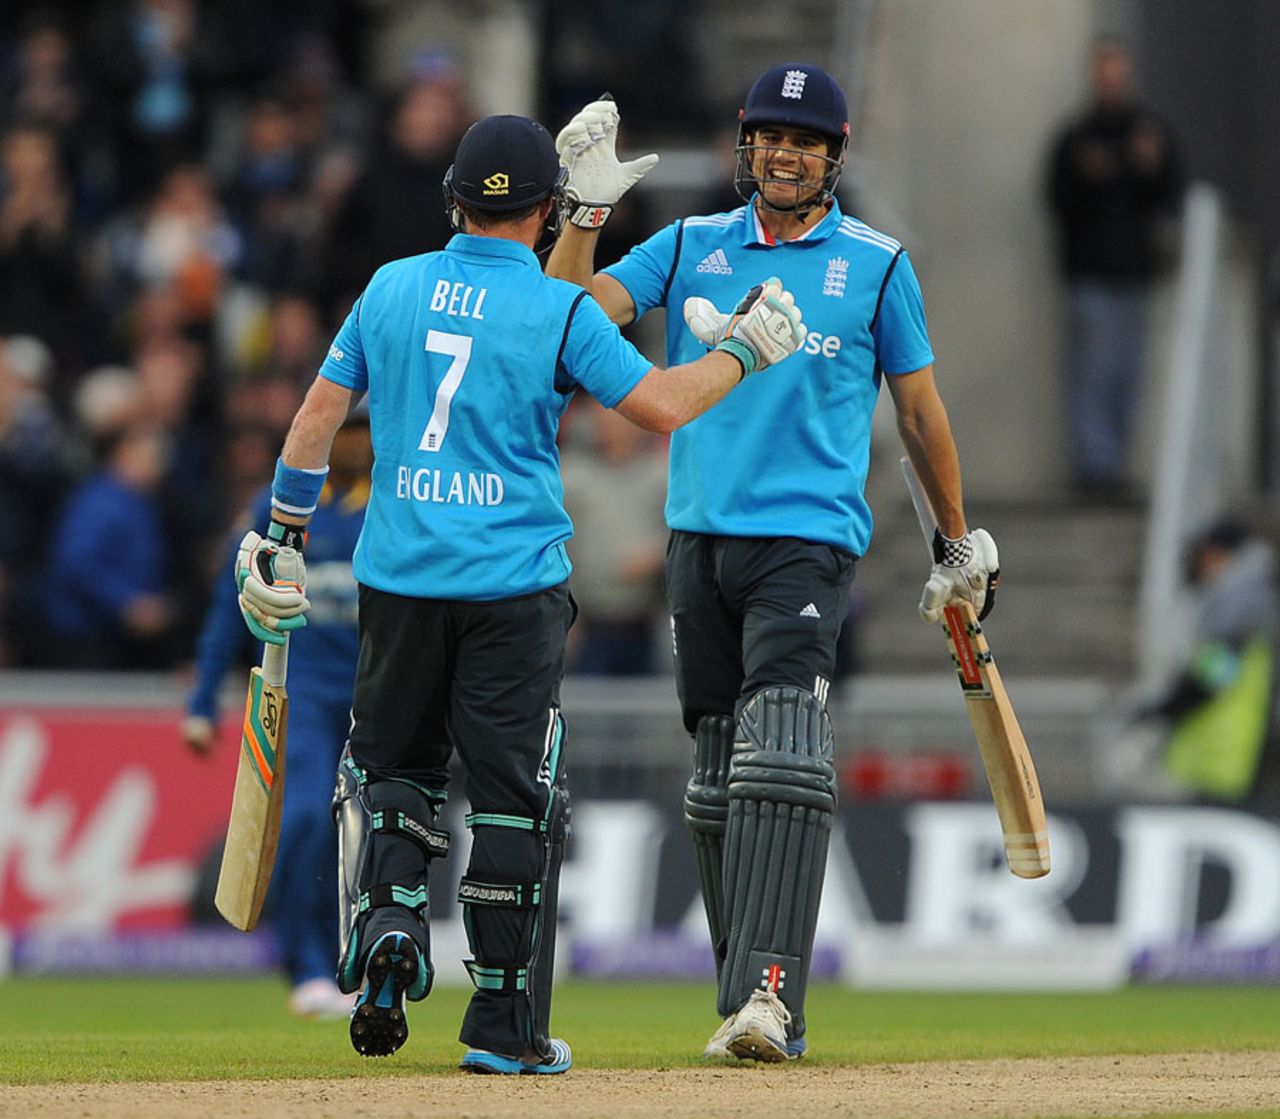 Ian Bell and Alastair Cook saw England to victory in 12.1 overs, England v Sri Lanka, 3rd ODI, Old Trafford, May 28, 2014